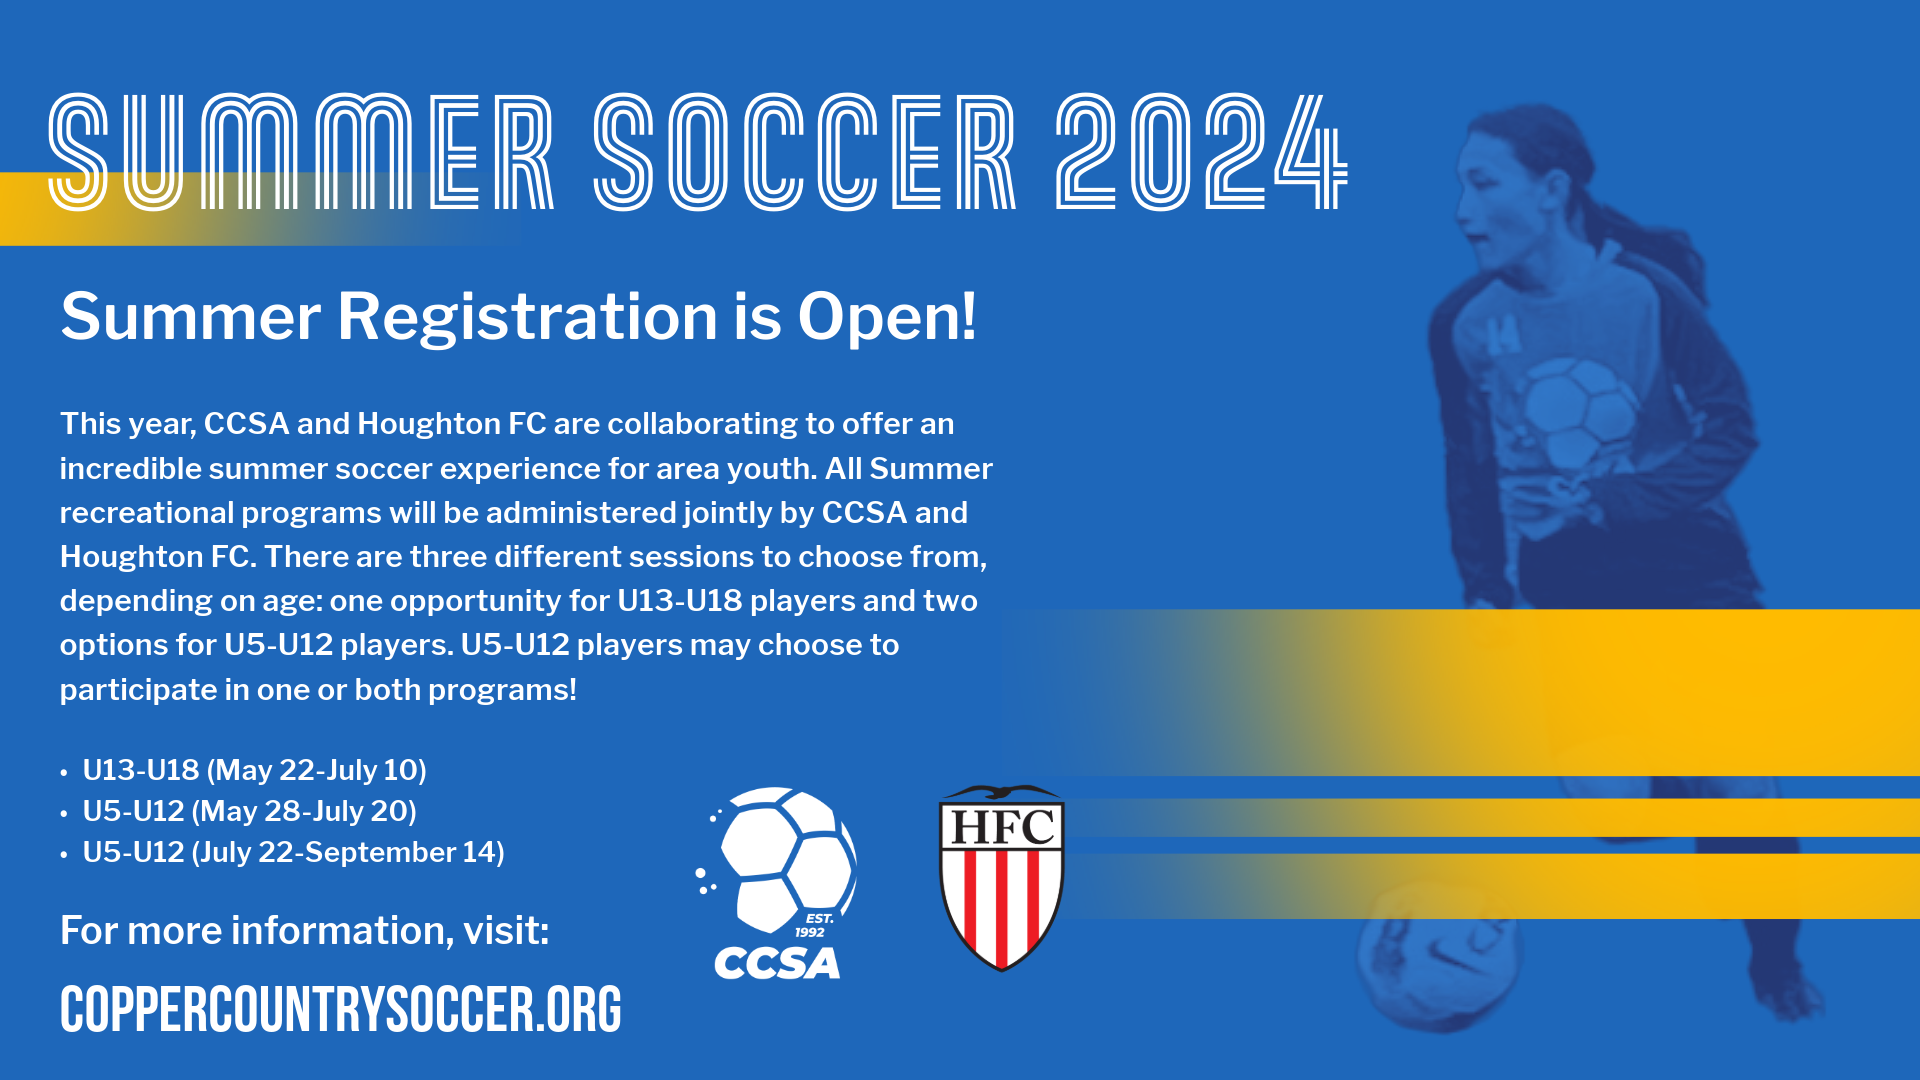 Graphic displaying information about Summer Soccer 2024 Registration. Duplicate information is on the registration page.